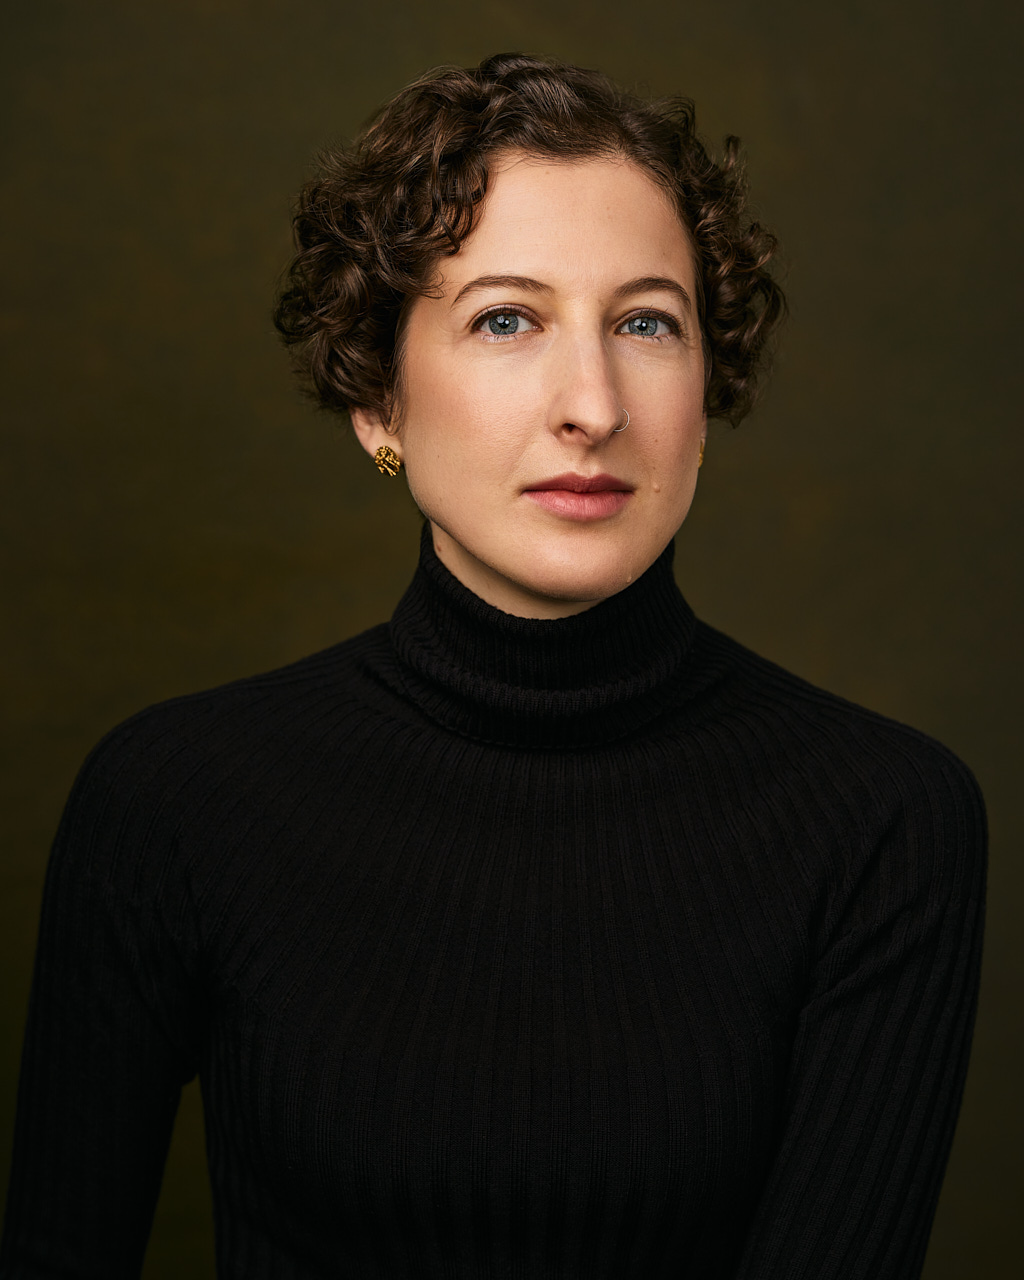 A stunning headshot of a woman wearing a black turtle neck.